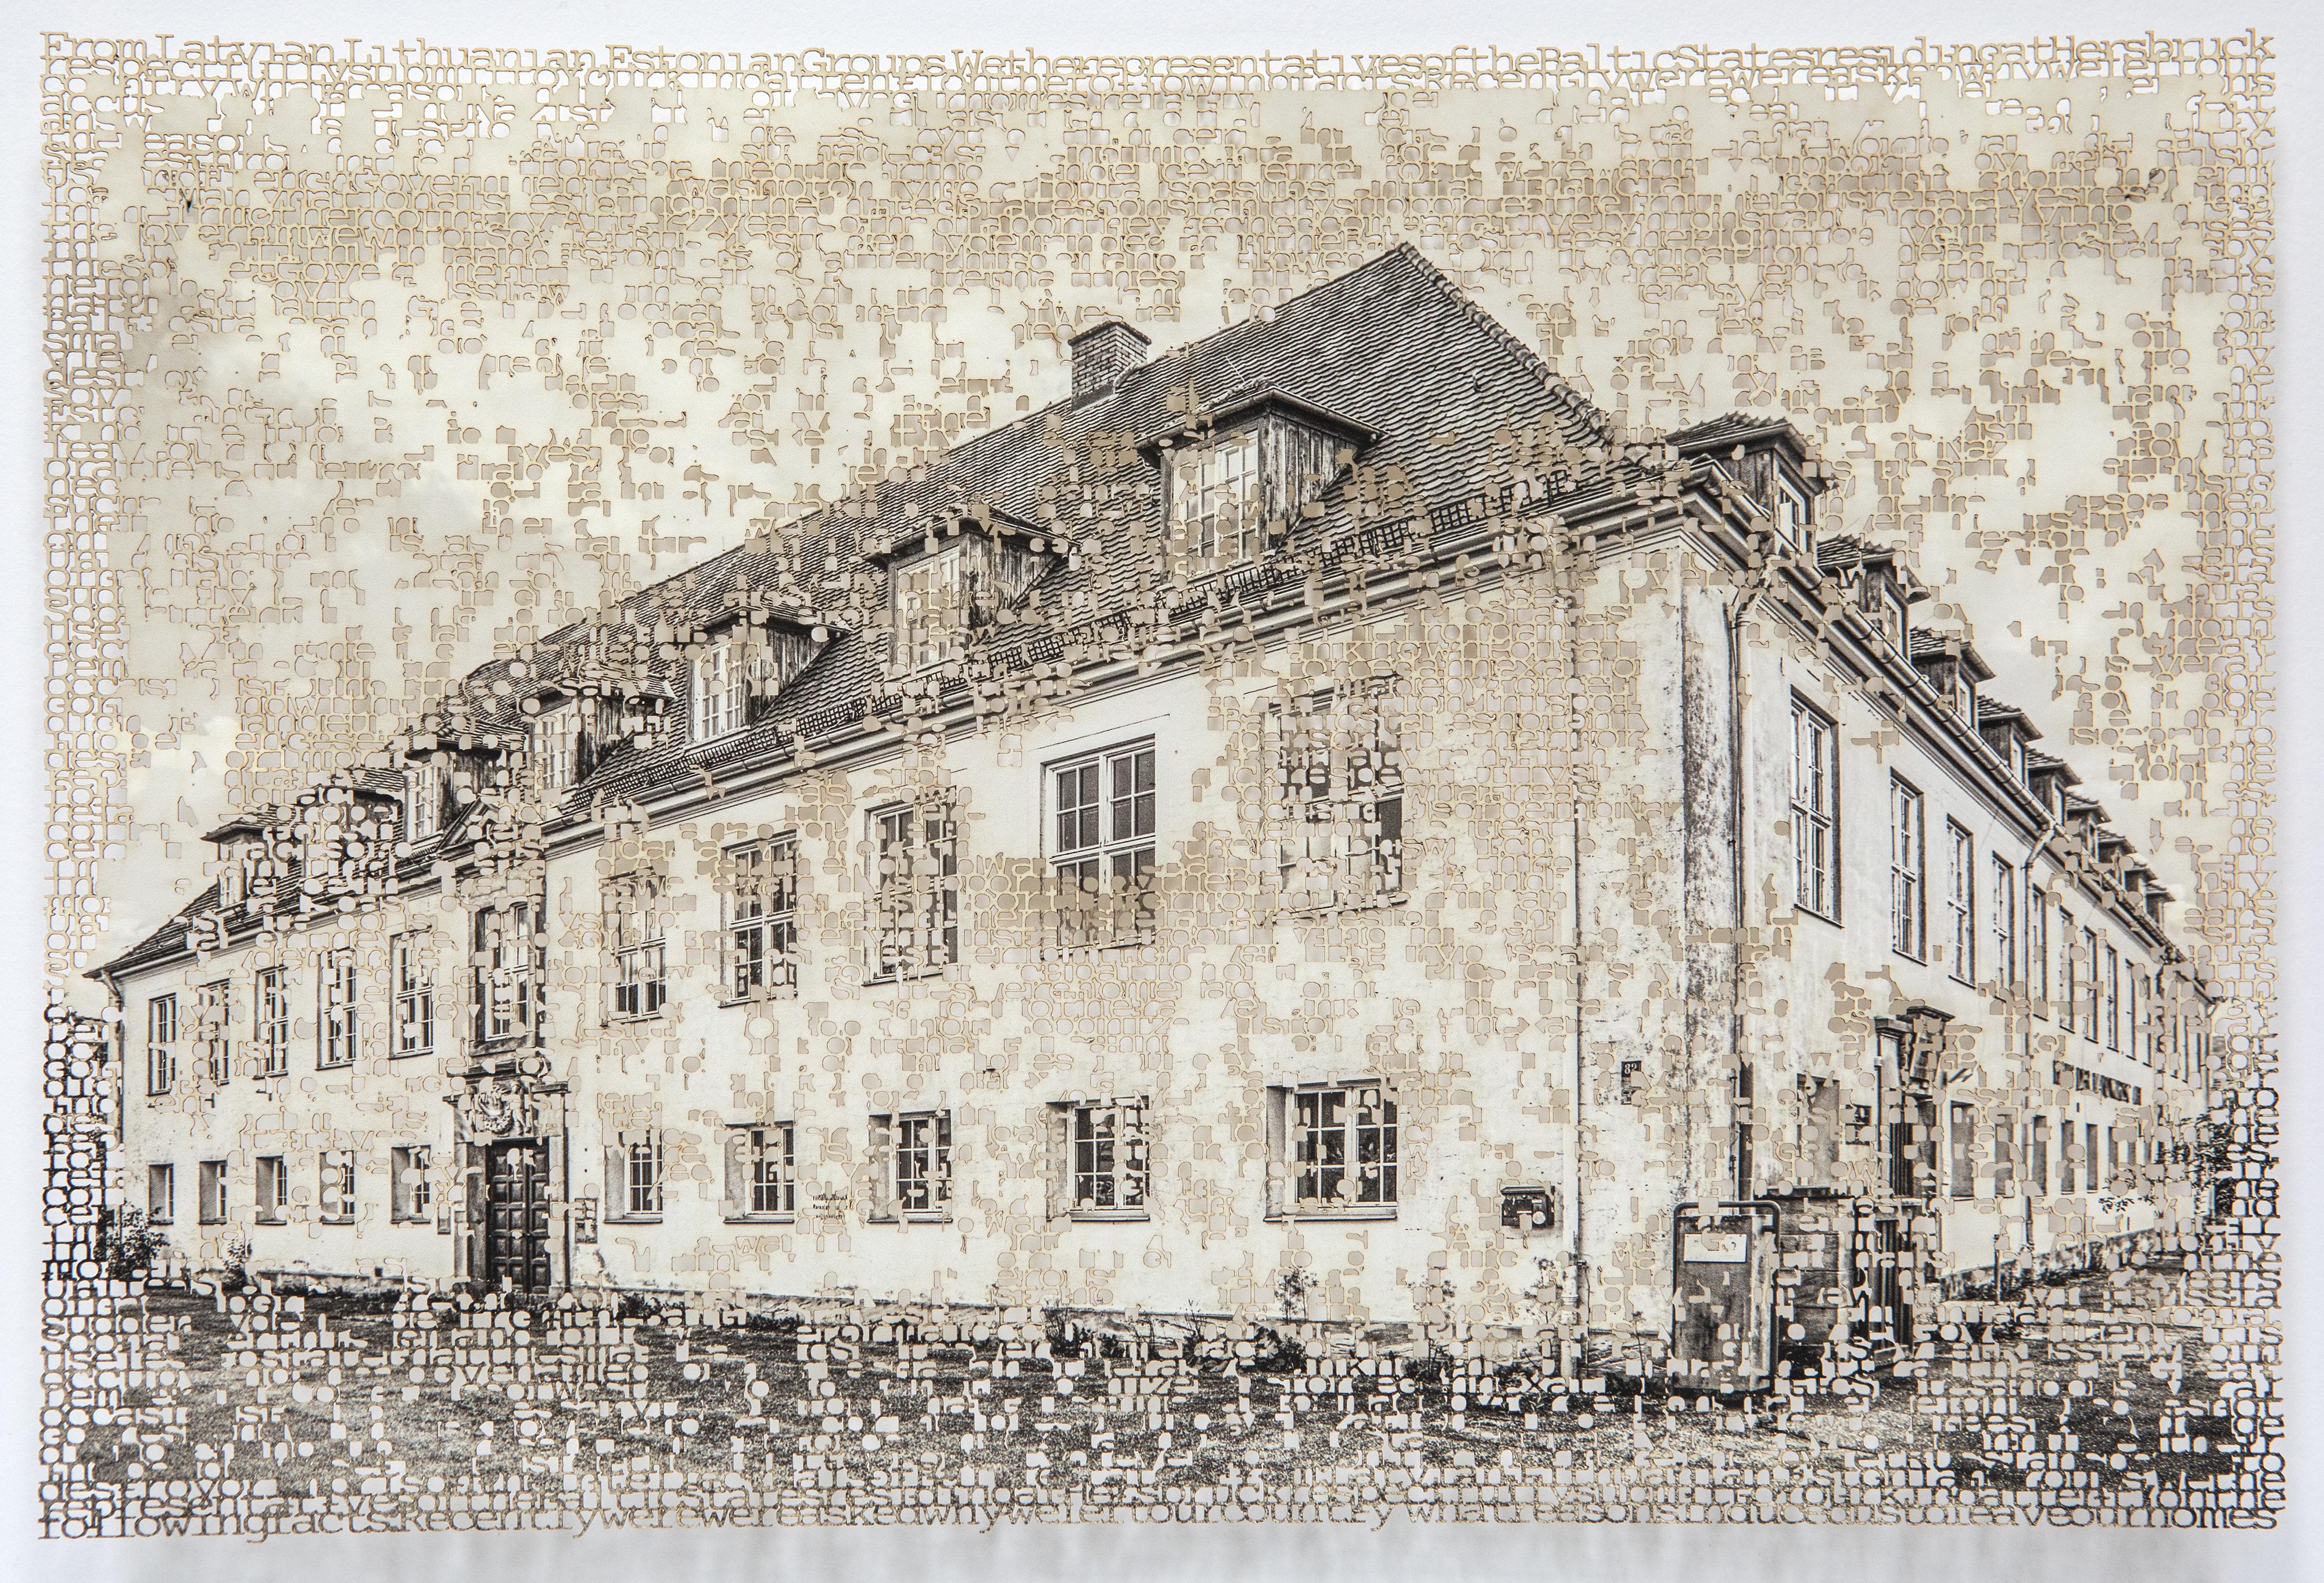 Krista Svalbonas Black and White Photograph - Hersbruck 1, Laser cut archival pigment ink print, signed, numbered, framed 